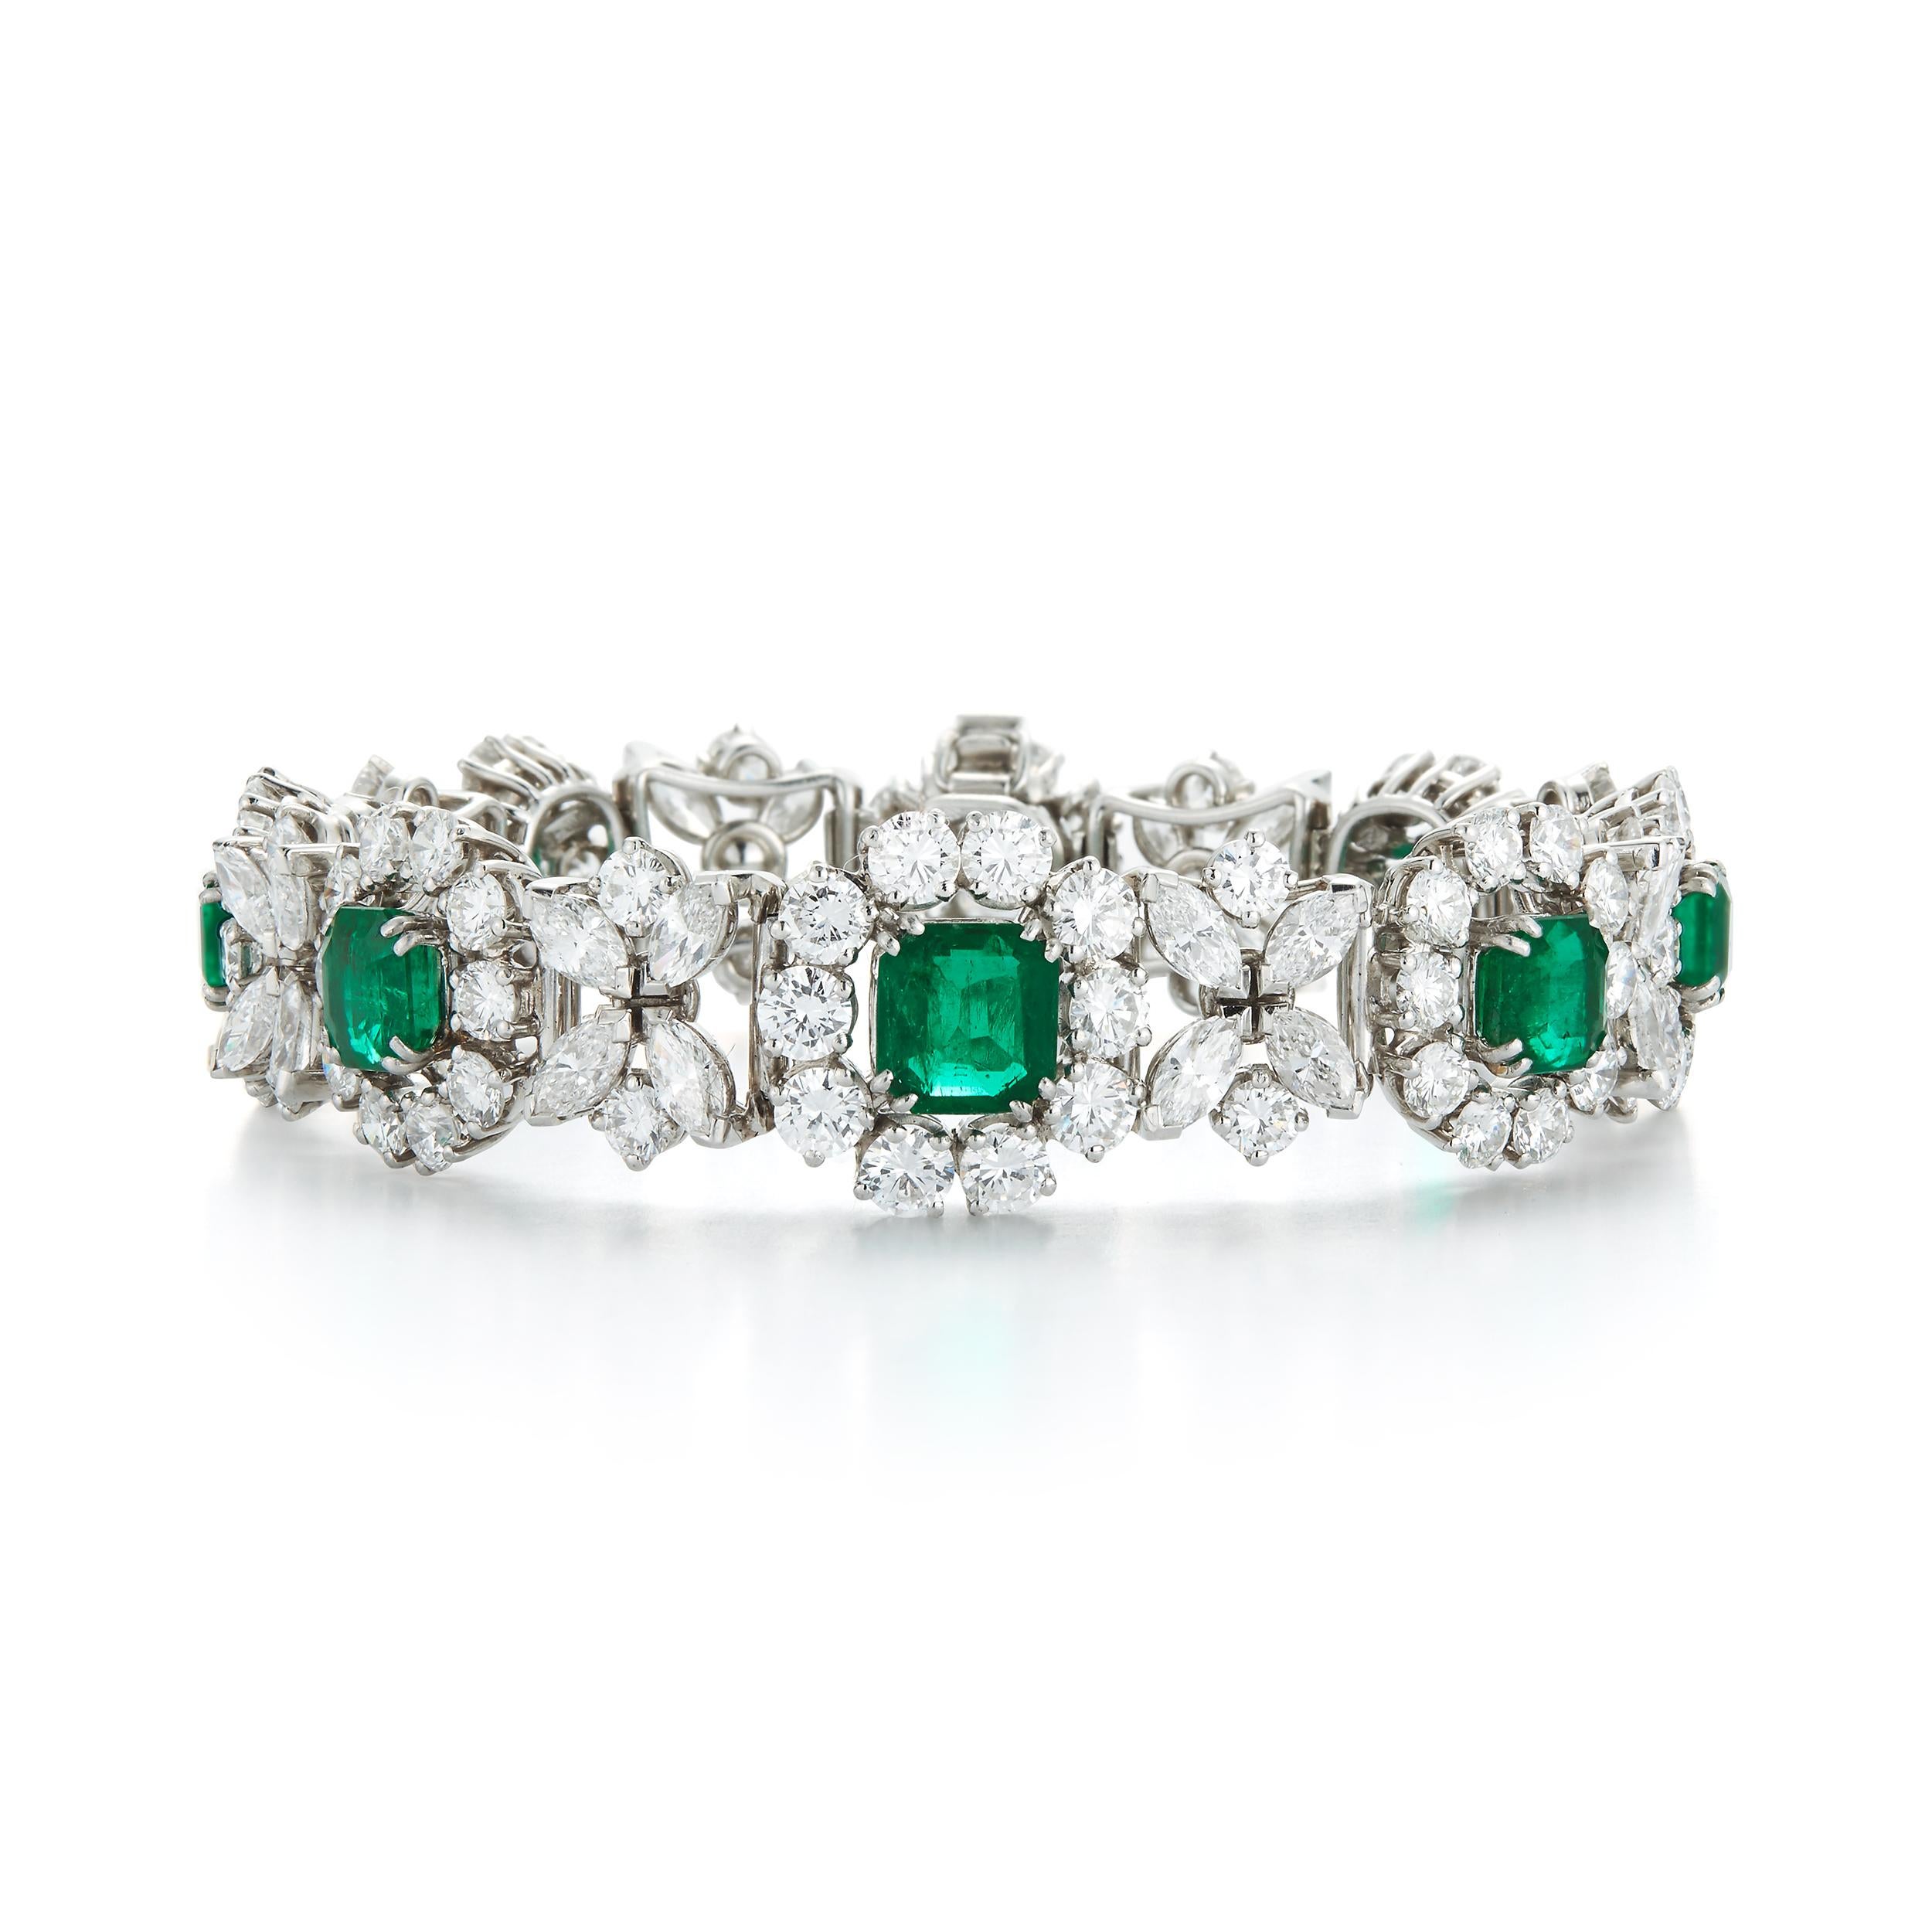 Magnificent Diamond & Colombian Emerald Platinum Bracelet. Set with seven Colombian Emeralds, total weight 10.10 carat and 19.05 carat of Diamond, F color VVS clarity. The Bracelet was Certified by the GIA.